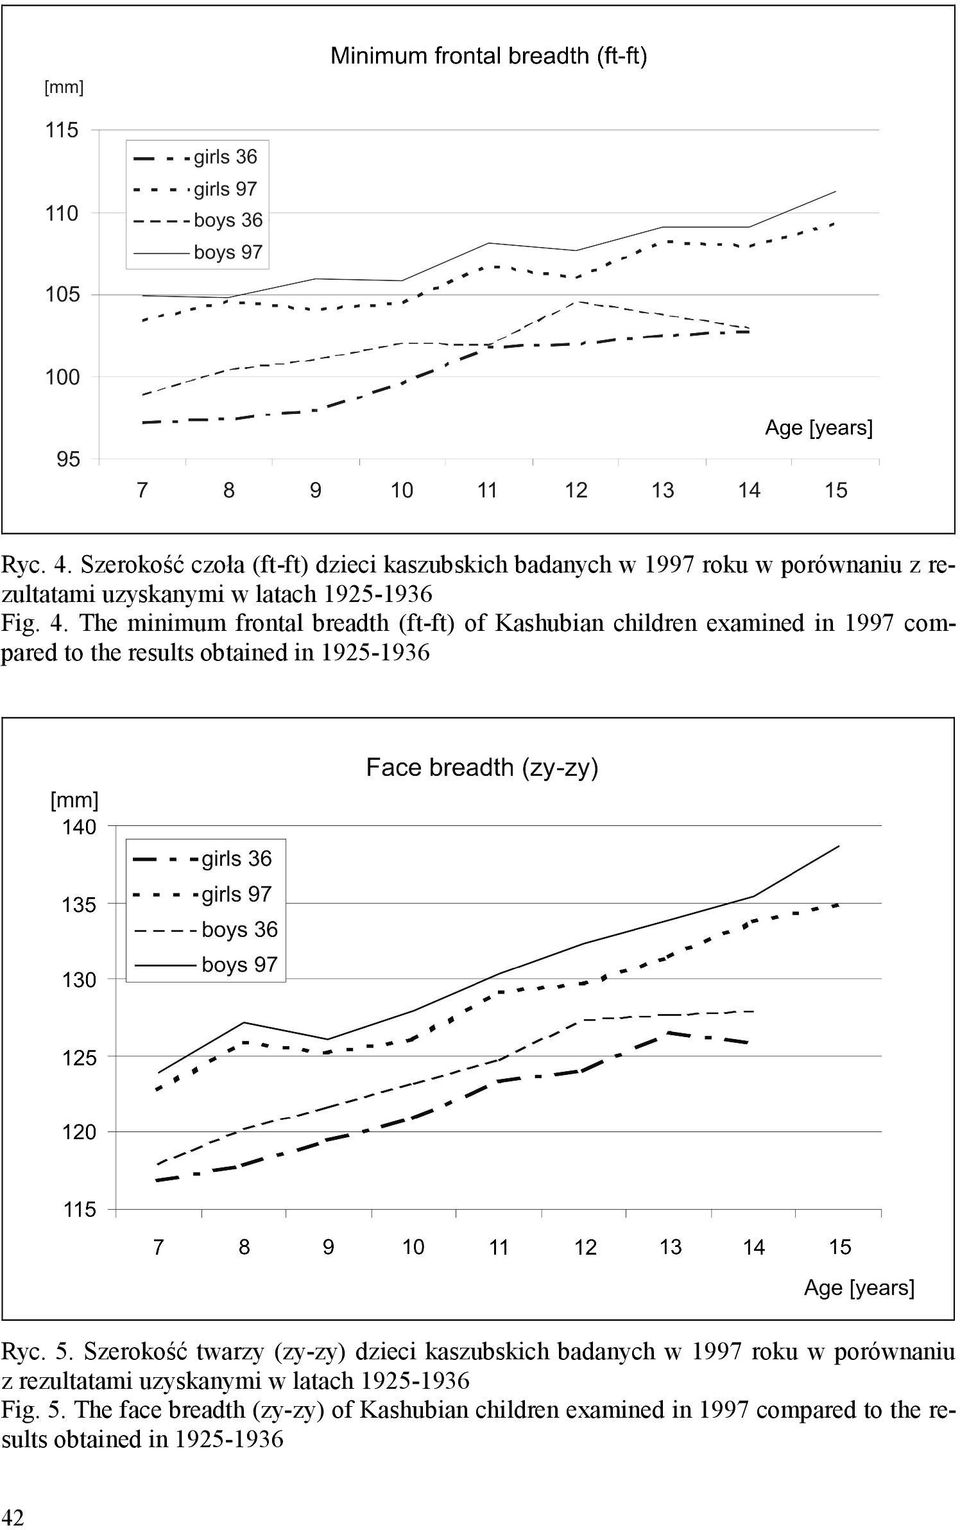 4. The minimum frontal breadth (ft-ft) of Kashubian children examined in 1997 compared to the results obtained in 1925-1936